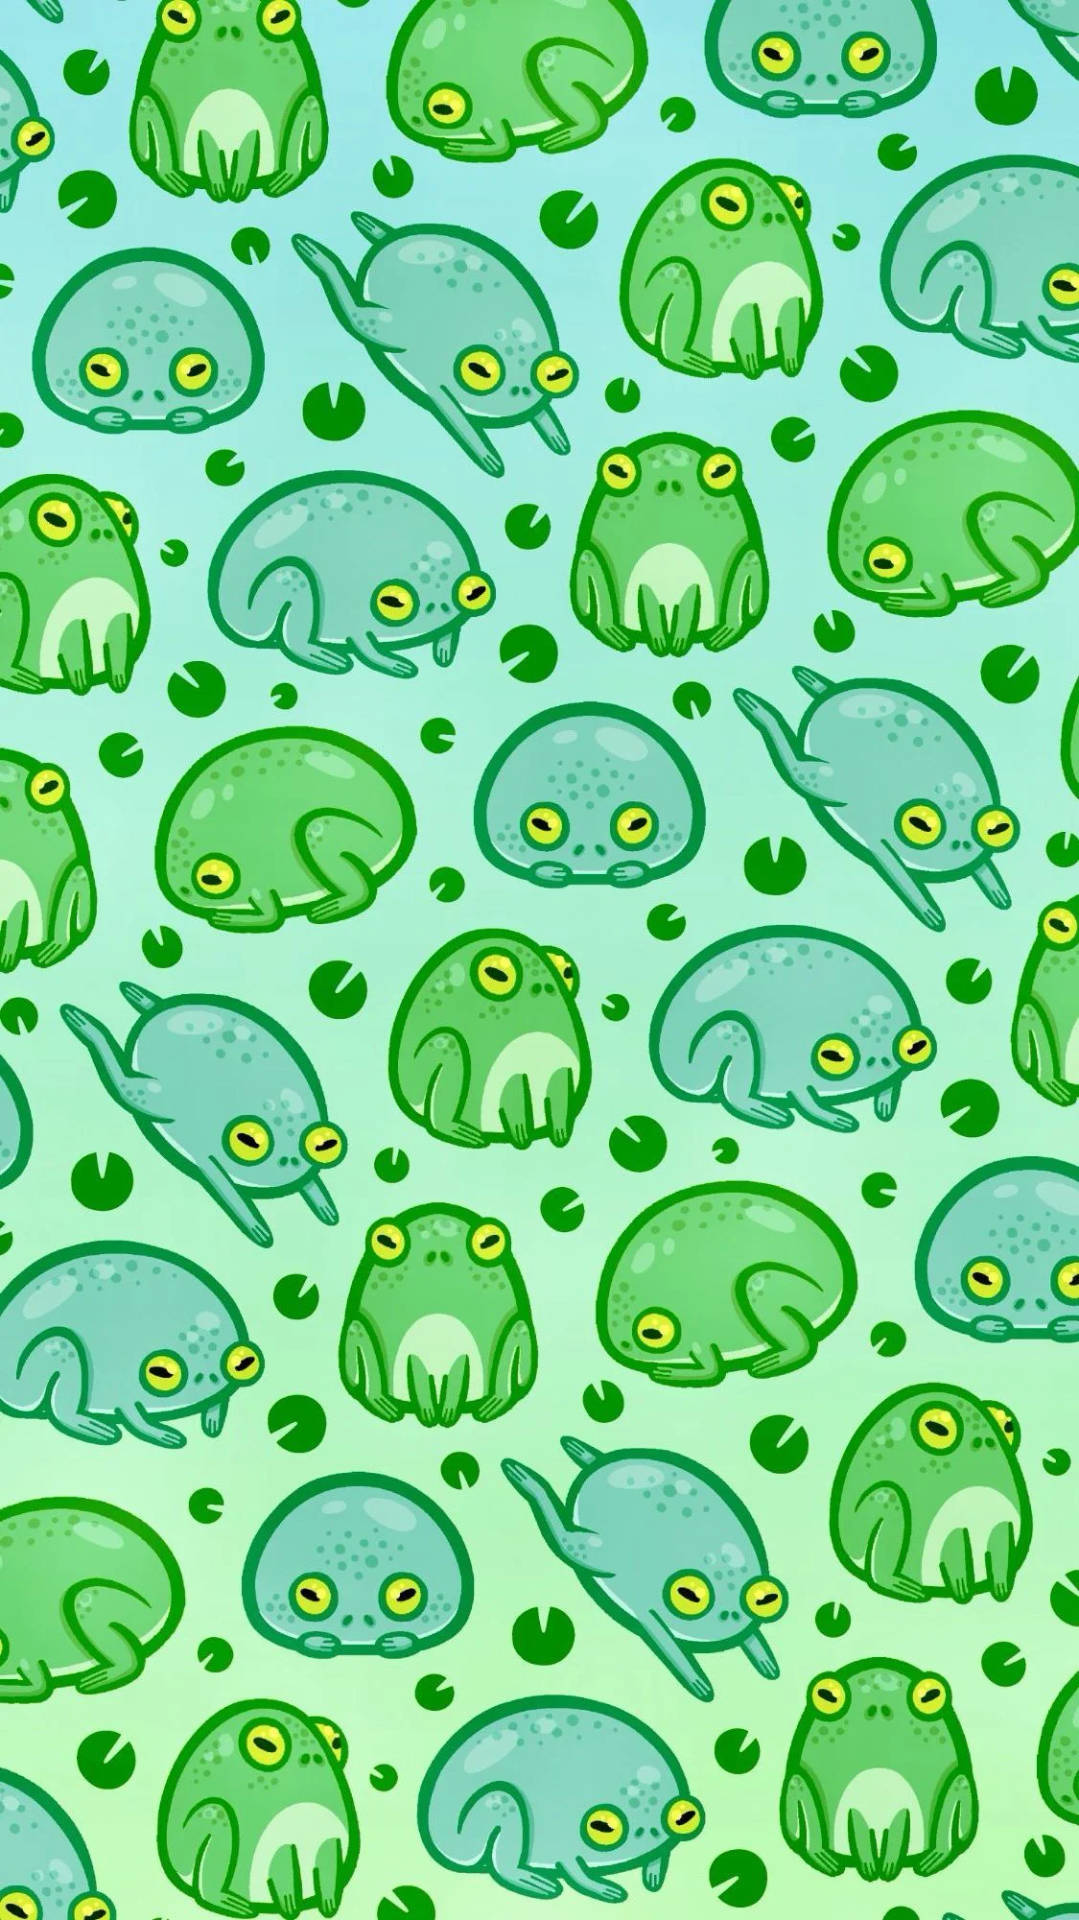 Rounded Kawaii Frog In Pattern Wallpaper